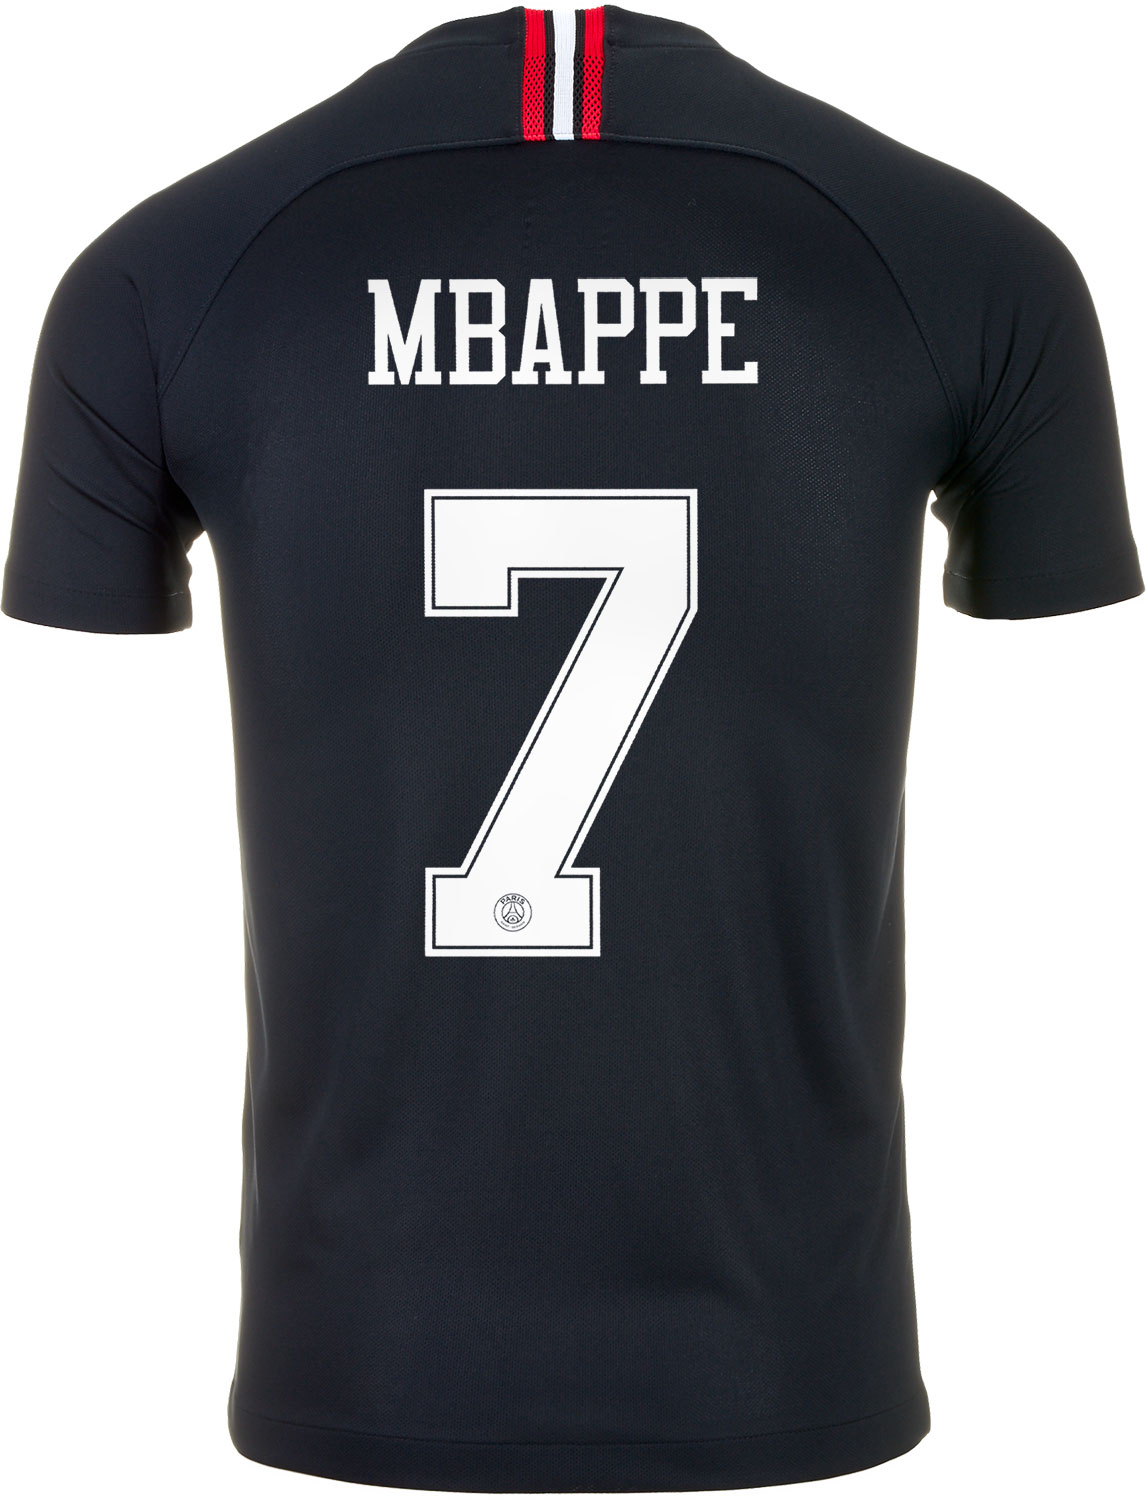 Mbappe Jersey - Management And Leadership